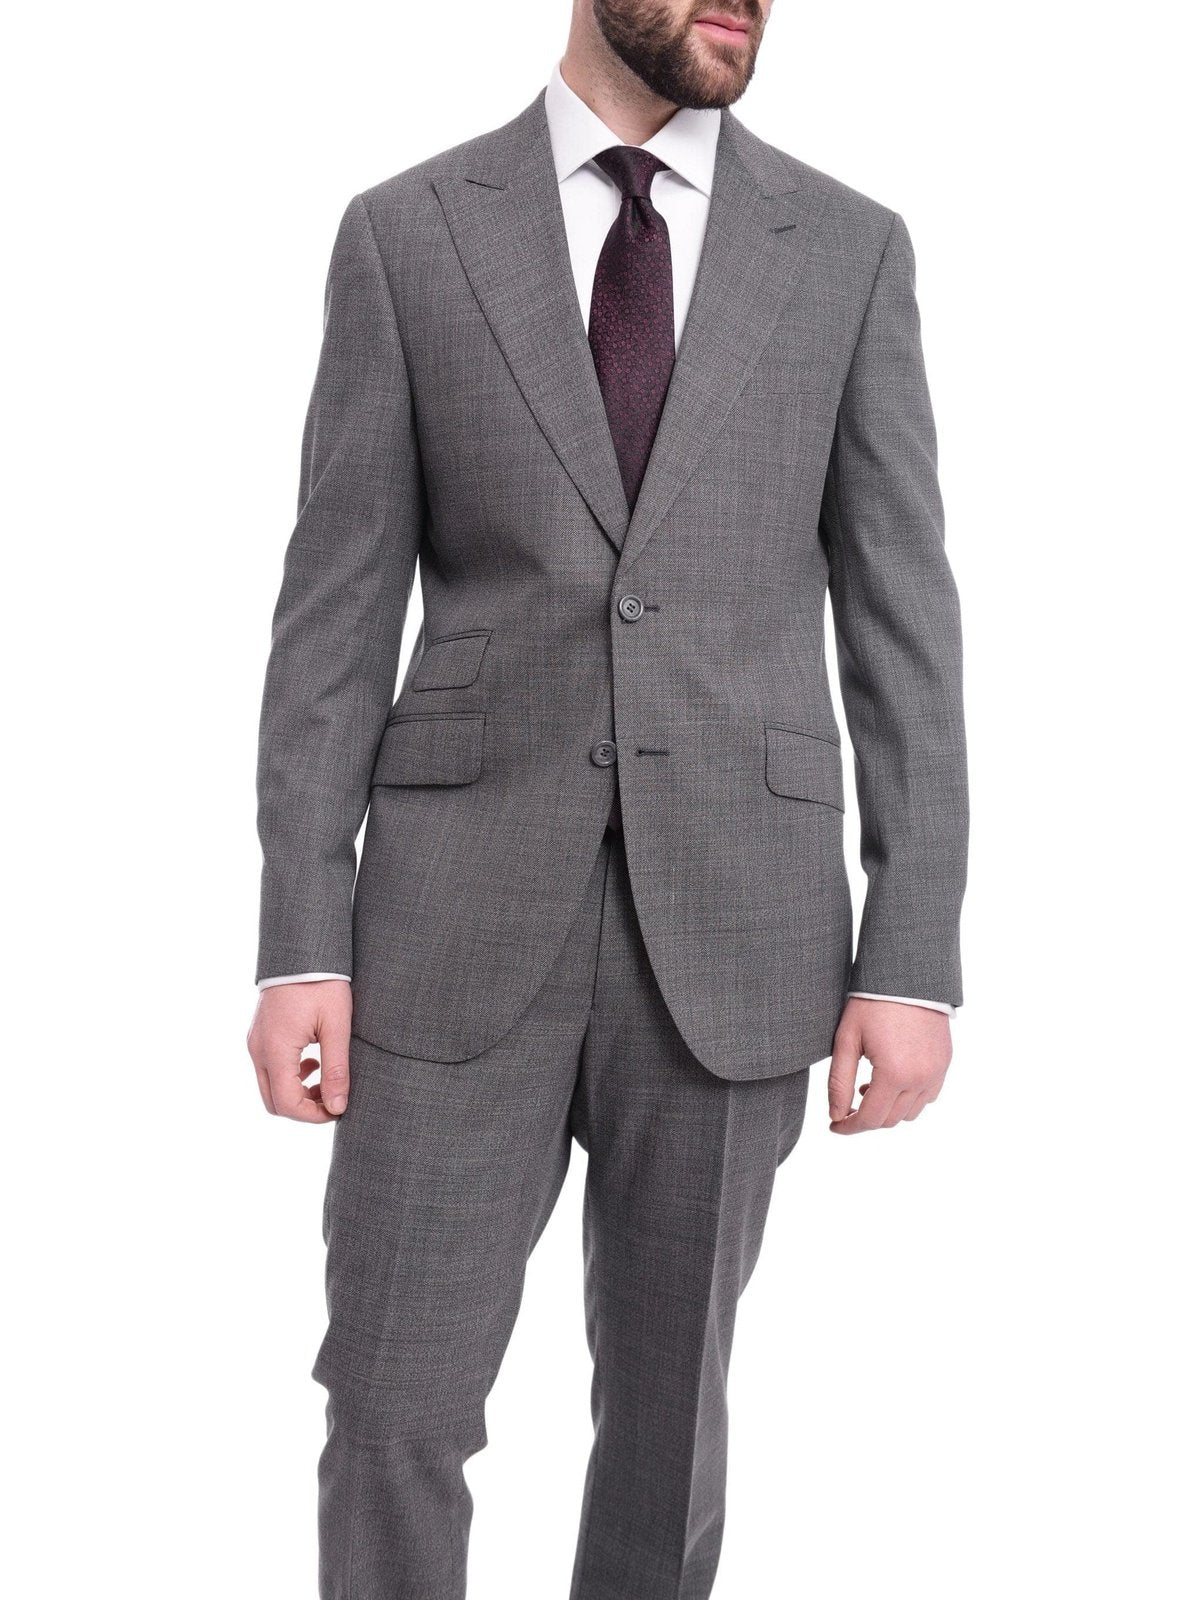 Napoli TWO PIECE SUITS Napoli Slim Fit Gray Stepweave Half Canvassed Wool Suit With Peak Lapels